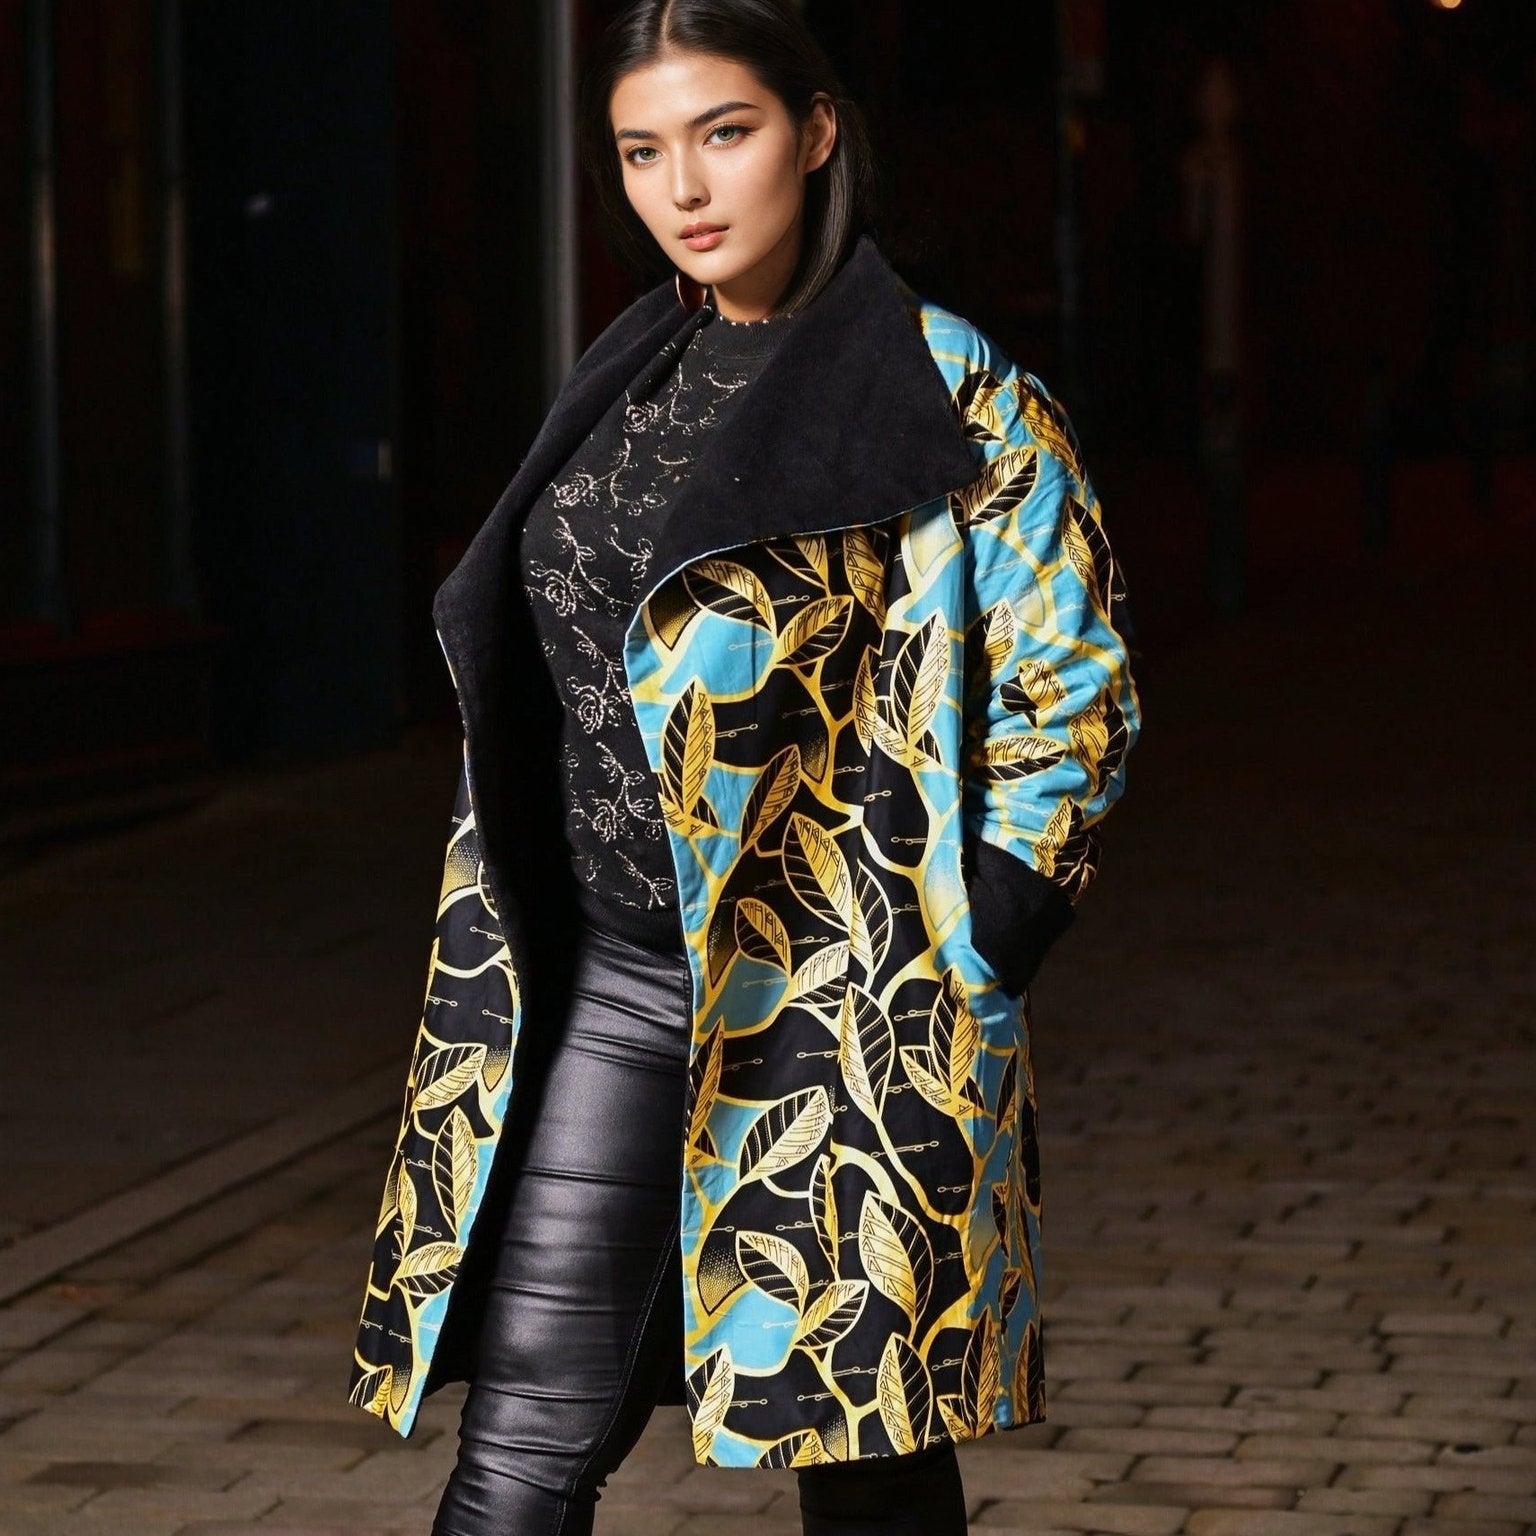 Green and Black African Print Waterfall Coat - rtw014 - House of Prints